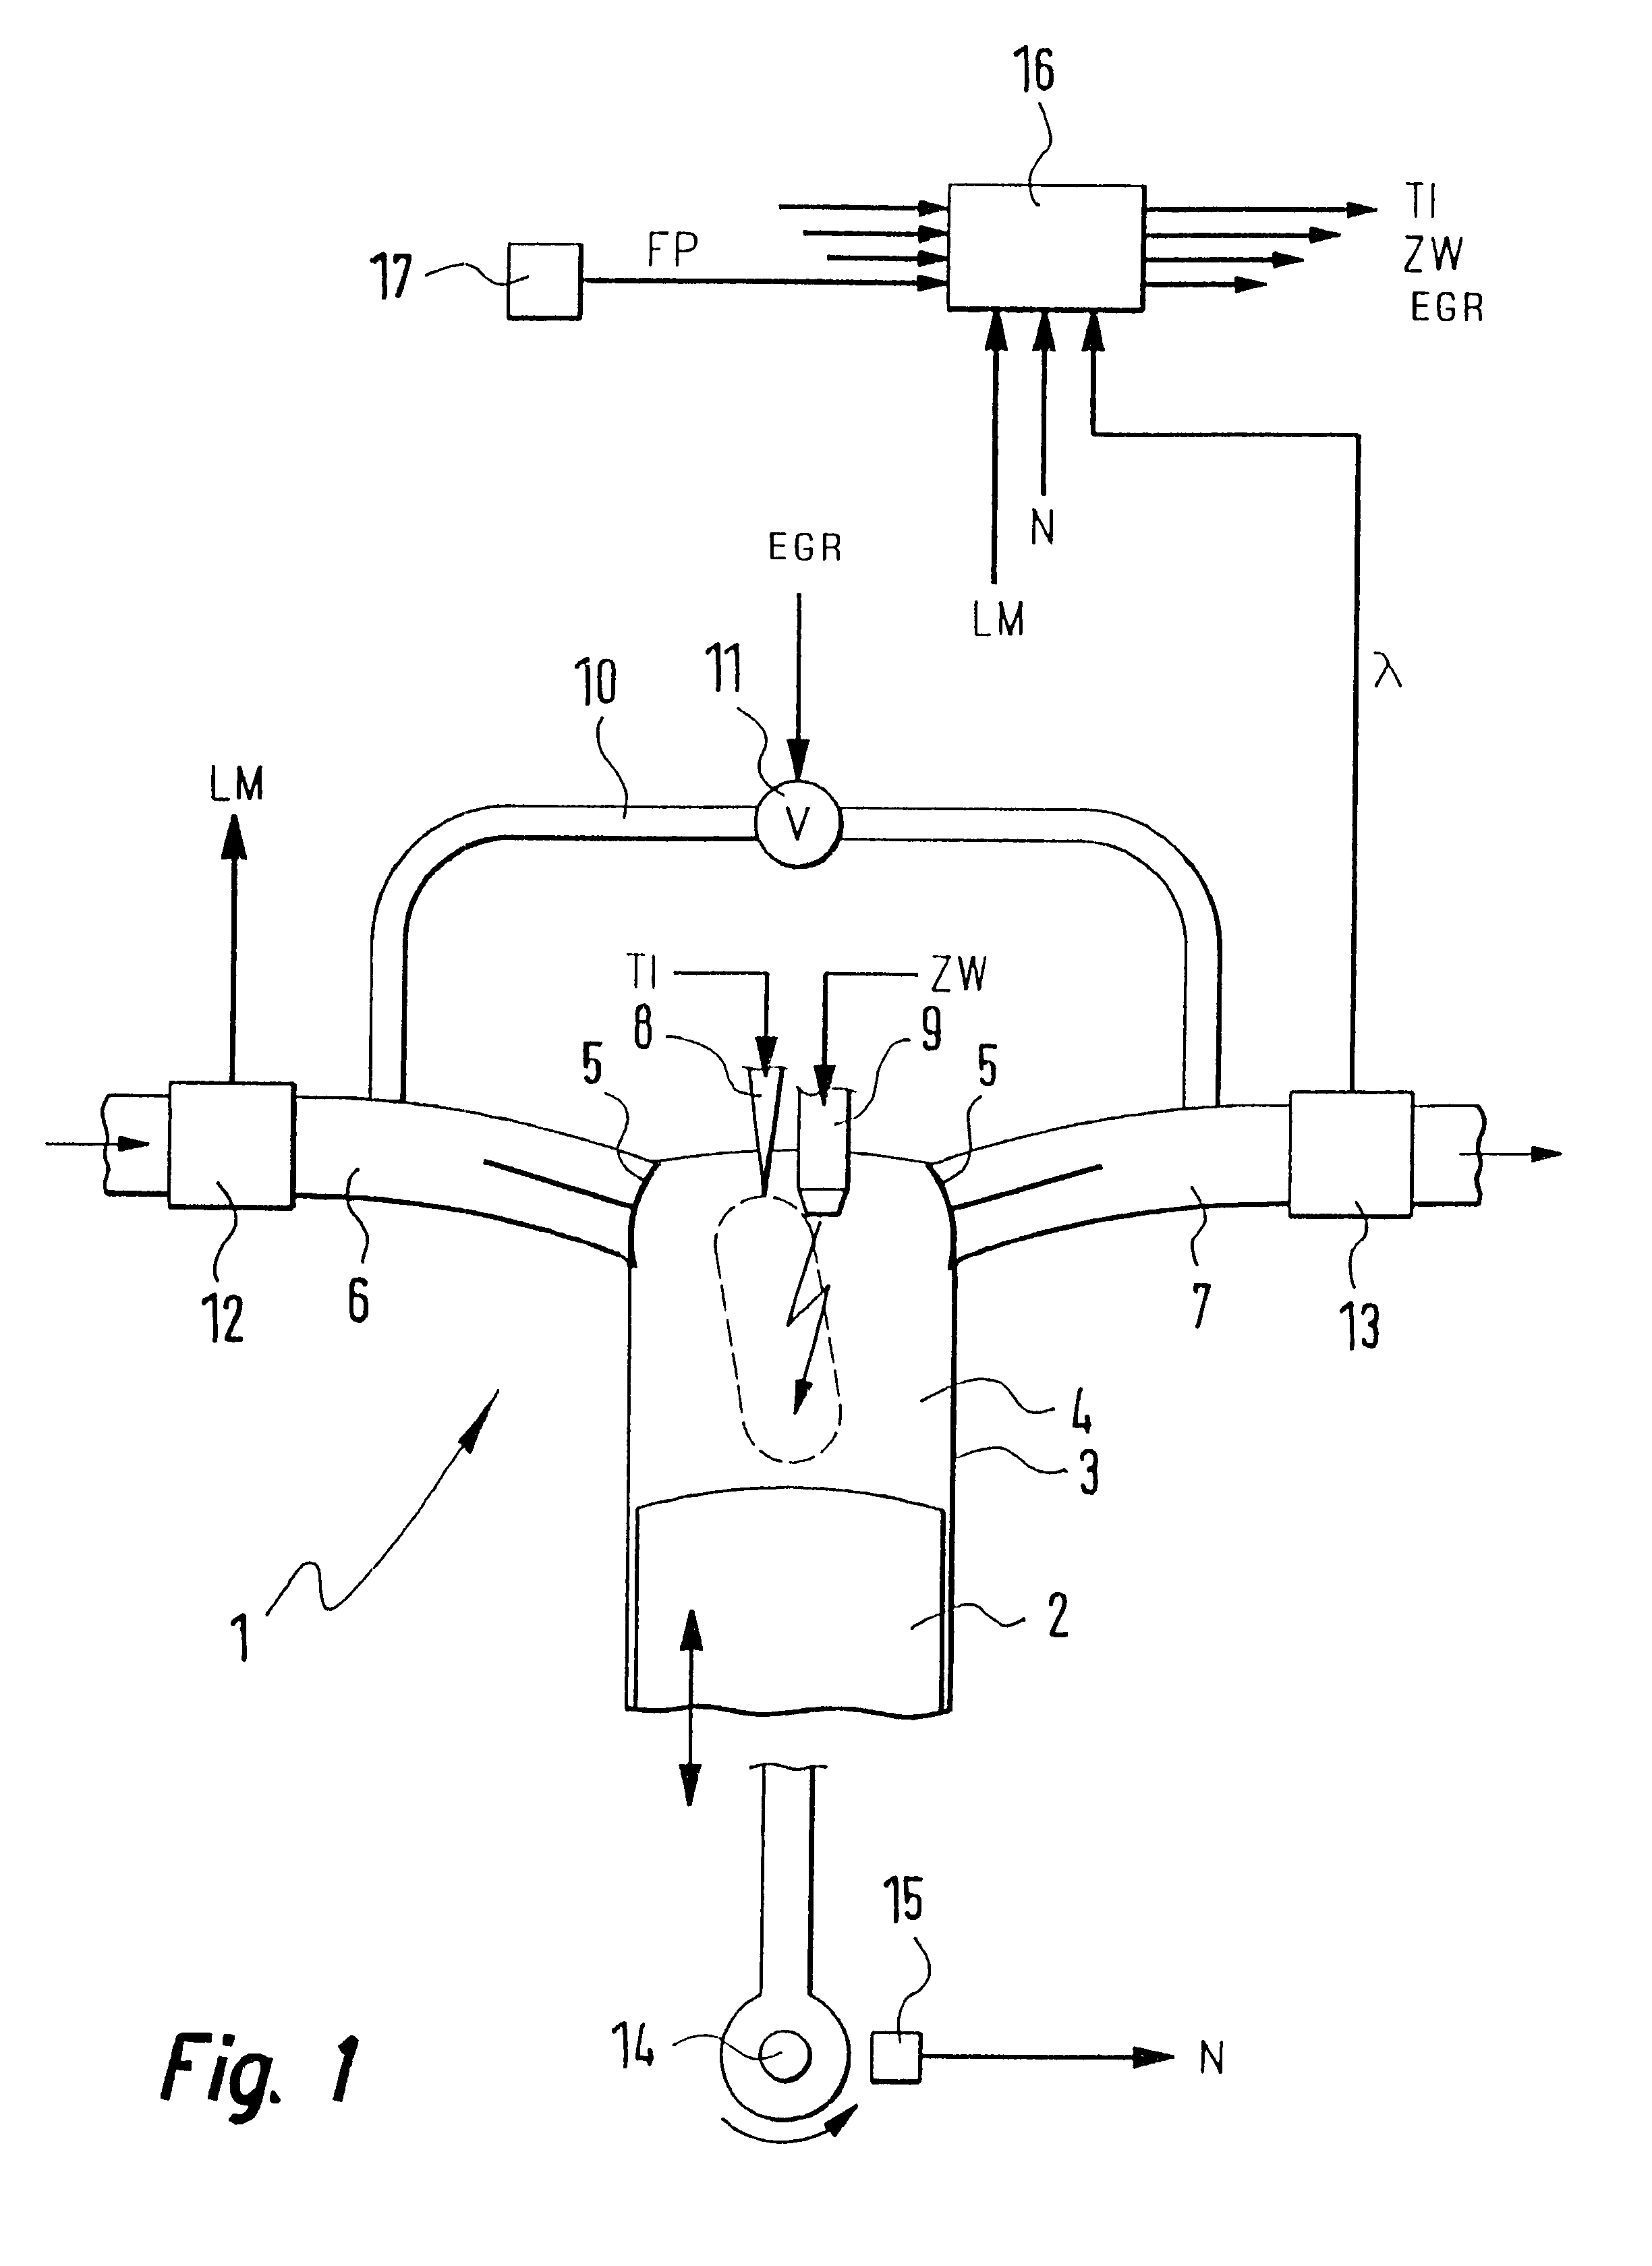 Method for starting an internal combustion engine, in particular on a motor vehicle